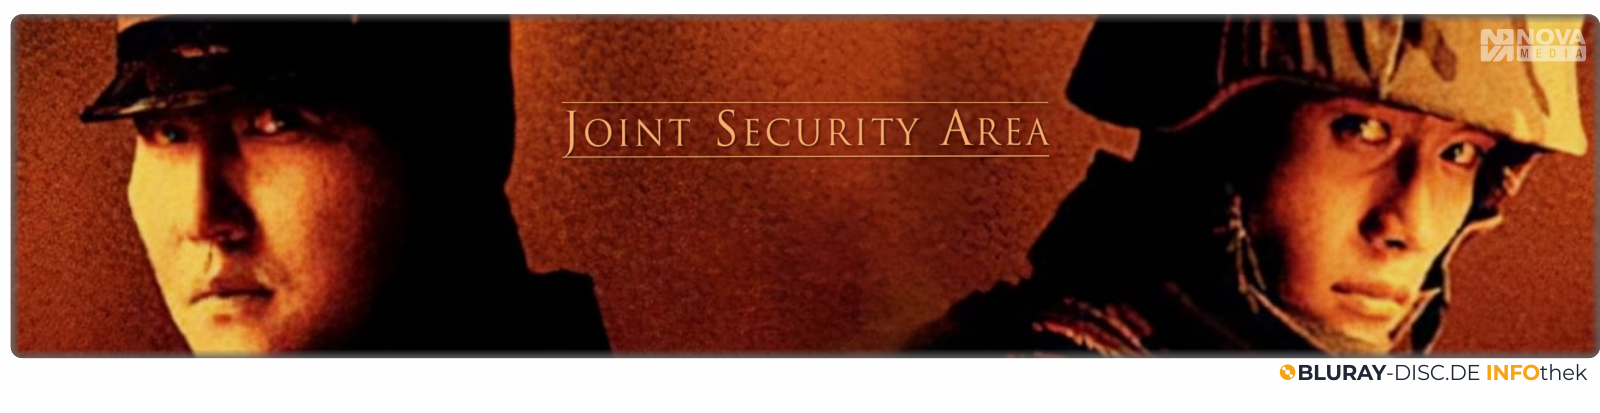 Moviebanner_NovaMedia_Joint_Security_Area.png